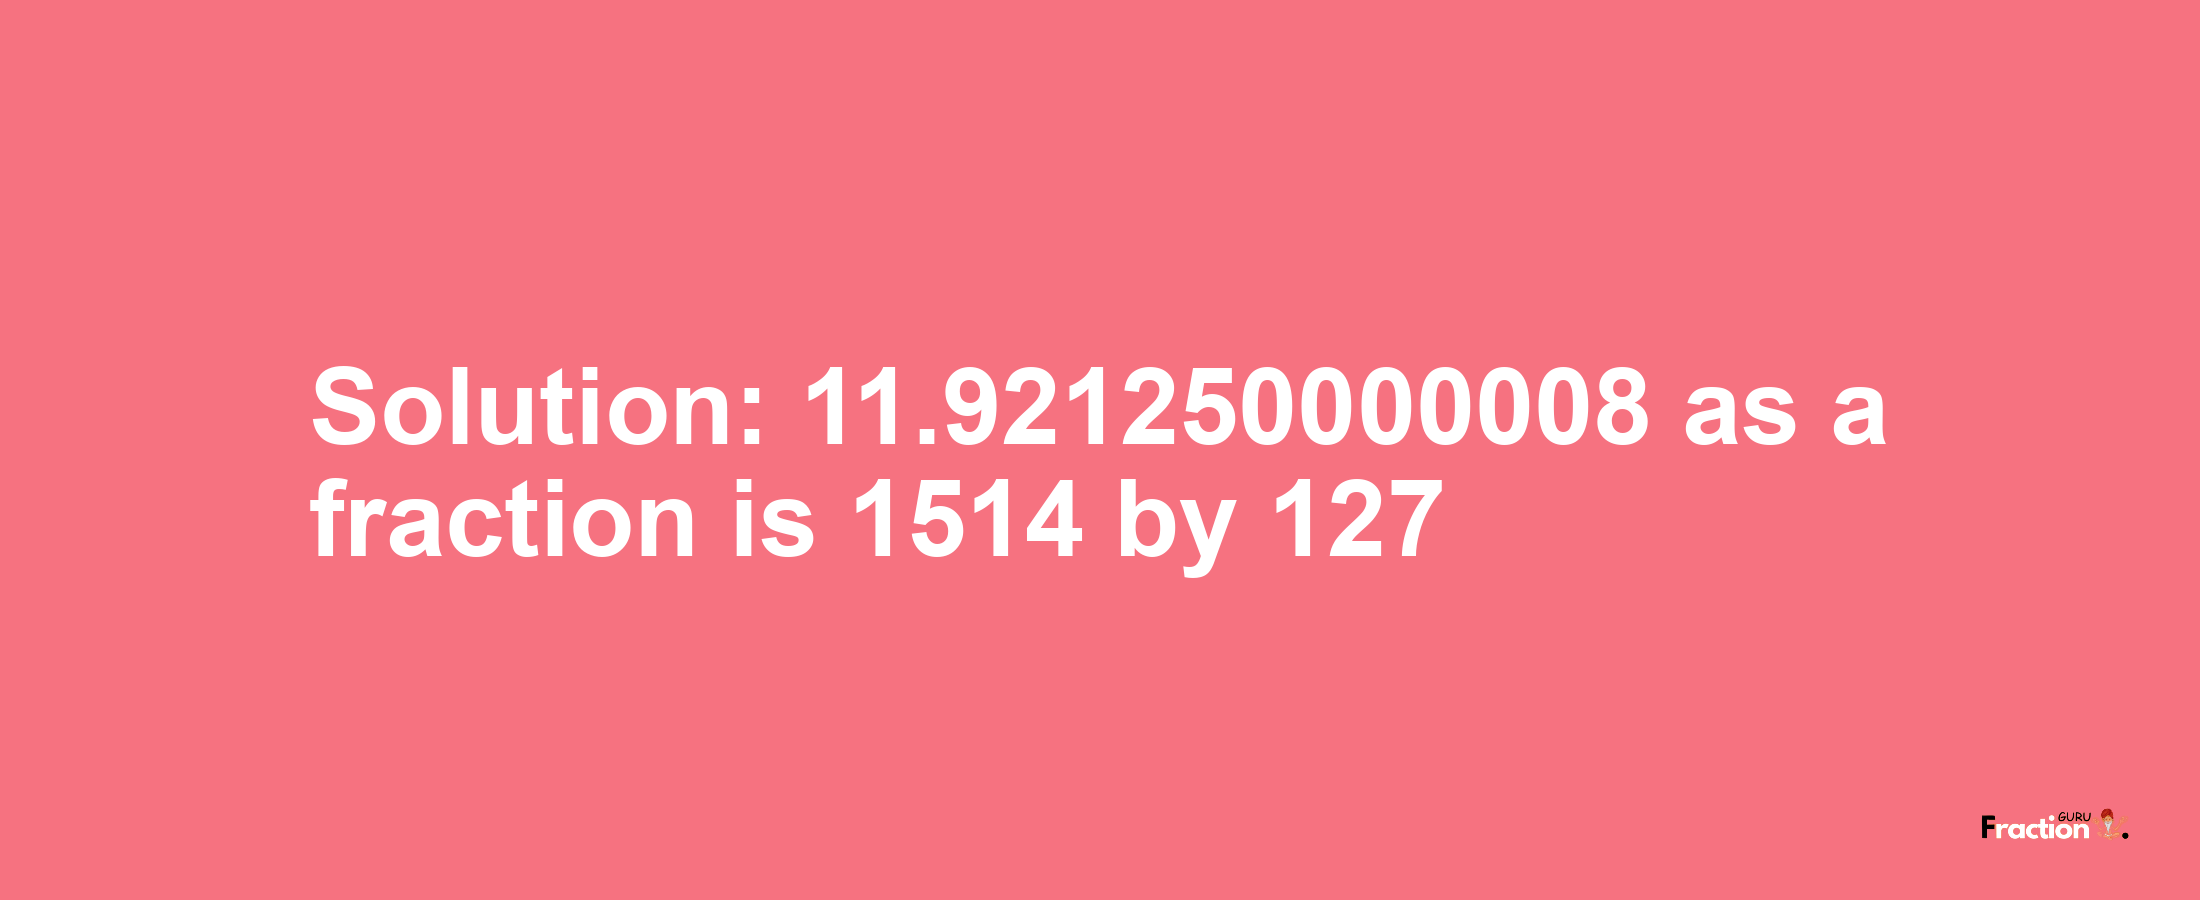 Solution:11.921250000008 as a fraction is 1514/127